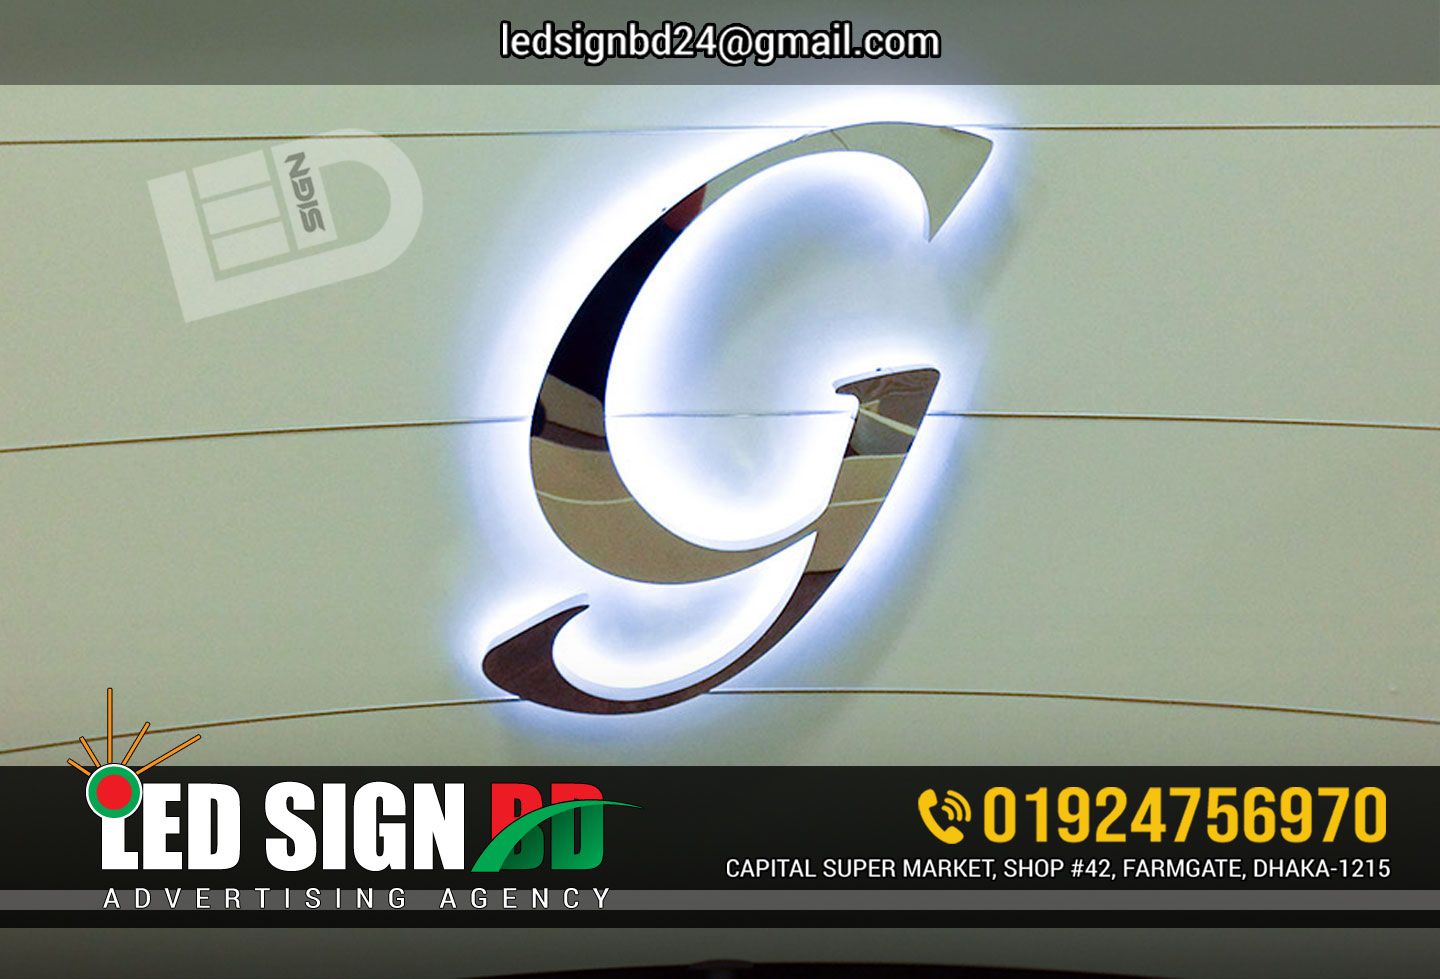 SS Top letter Signage, Best Neon Signage Agency in Dhaka, LED Sign bd LED Sign Board Price in Bangladesh Neon Sign bd Neon Sign Board neon rgb led strip rgb light in bd signboard bd board design. A great Neon sign is an amazing home accessory and also ideal for business purposes. Do you want to create your own glow decoration that could enhance your own place or bring your party to the next level? Now customize your dream neon! It can be a lighting tool to light up your place, and a lovely decor for your salon, coffee shop. Talk to us for more neon decoration ideas!. Acrylic Letter LED Sign 3D Sign Letter Arrow Sign Board & Glow Arrow Sign with Acrylic Sign Acp Off Cutting Sign Branding for Outdoor Led Sign Board in Bangladesh. Best Acrylic & SS Letter Sign - Mirror SS & Glow Signage Glow Yellow Color Acrylic Signage & Yellow Led Light Led Sign Acrylic Letter Price in Bangladesh-2023 A-Z Alphabet Letter Acrylic Mirror Wall Art Sticker Decal Glow Sign Board Best Price in Bangladesh &Glow Acrylic Sign 3d Acrylic Letter Sign board SS Sign Board SS Top Letter Acrylic Top Letter SS Metal Letter acrylic letter design acrylic letter price acrylic letter making machine acrylic letter sign board acrylic letter cutting near me acrylic letter signage led acrylic letter price acrylic letter templates Acrylic Letter with Led Sign Board Neon Sign Board Acrylic Top Letter SS Sign Board Name Plate Board LED Display Board ACP Board Branding Acrylic Top Letter SS Top Letter Aluminum Profile Box Backlit Sign Board Billboards Box LED Light Shop Sign Board Lighting Sign Board Tube Light Neon Signage Neon Lighting Sign Board Box Type MS Metal Letter Indoor Sign Outdoor Signage Advertising Branding Service All over Bangladesh. Our Service All Kinds of Digital Print Pana, PVC, Shop Sign, Name Plate, Lighting Sign Board, LED Sign, Neon Sign, Acrylic Sign, Moving Display, Fair Stall & Event Management Ad Etc. Hope You’re Interested! Bangladesh